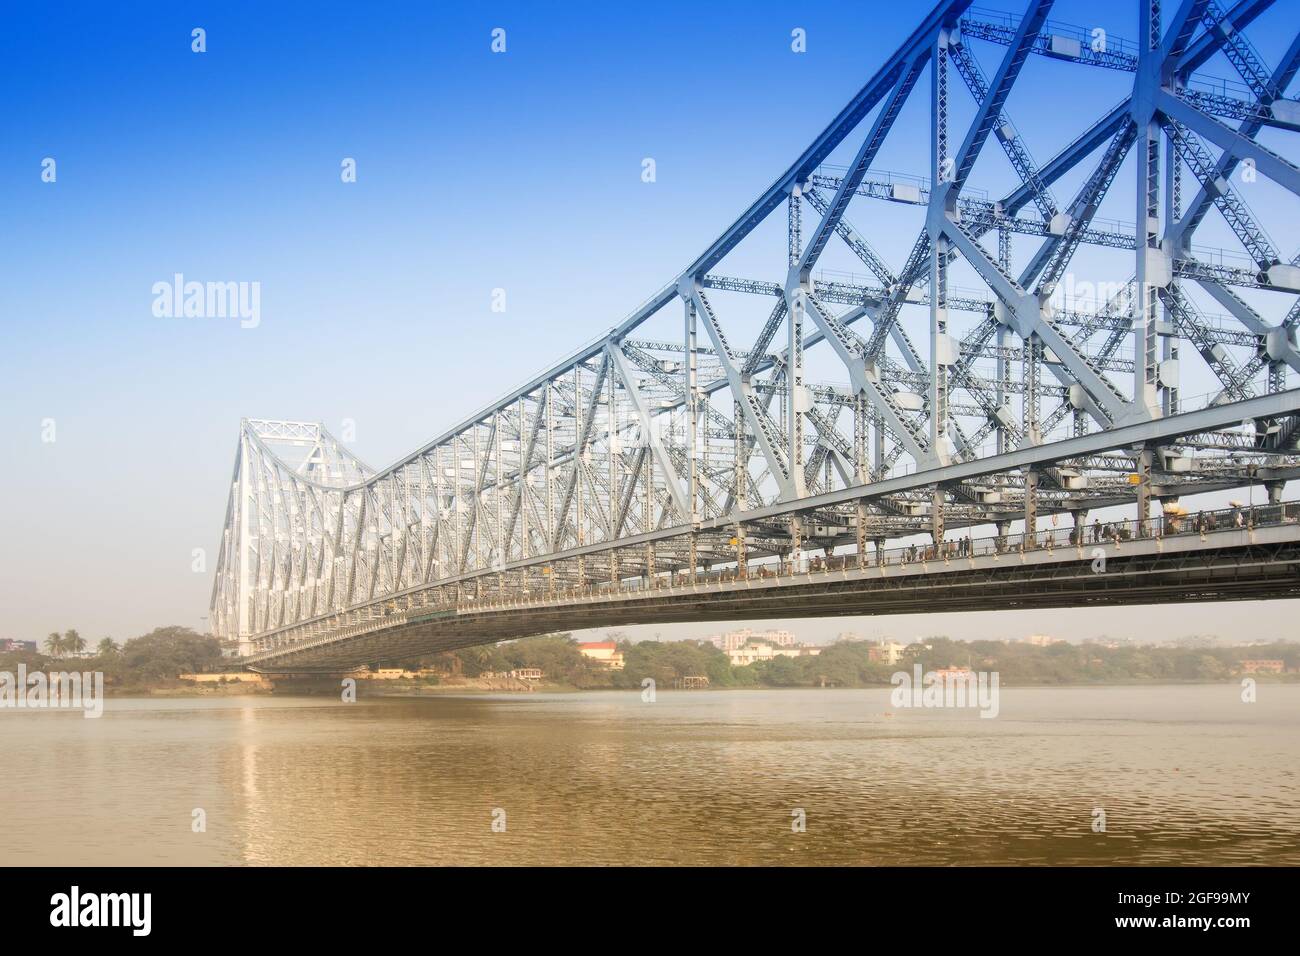 Famous Howrah Bridge connecting Howrah and Kolkata, a propped cantilever bridge with a suspended span over the Hooghly River in West Bengal, India. Co Stock Photo